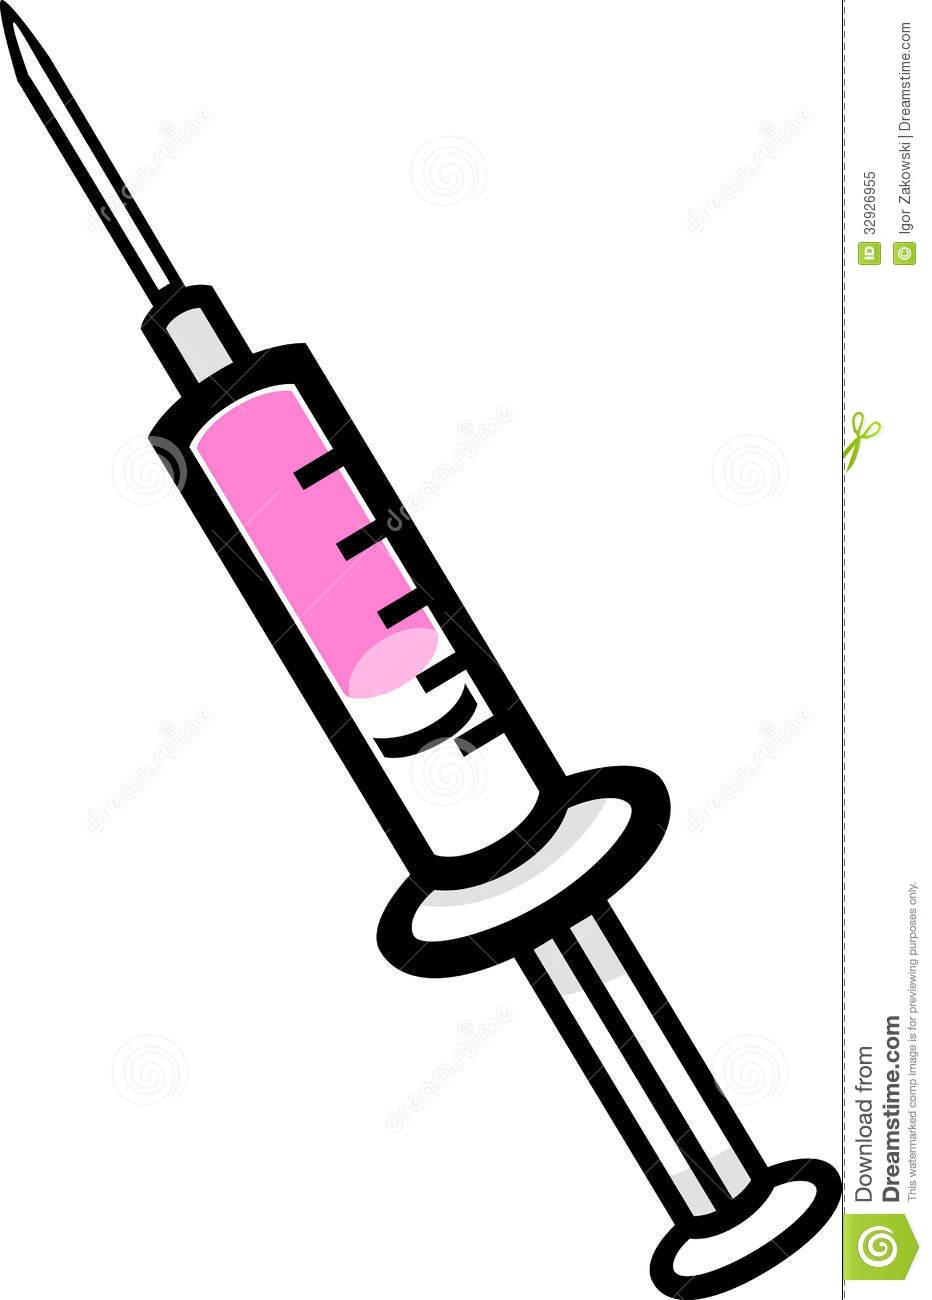 Needle clipart cartoon, Needle cartoon Transparent FREE for download on